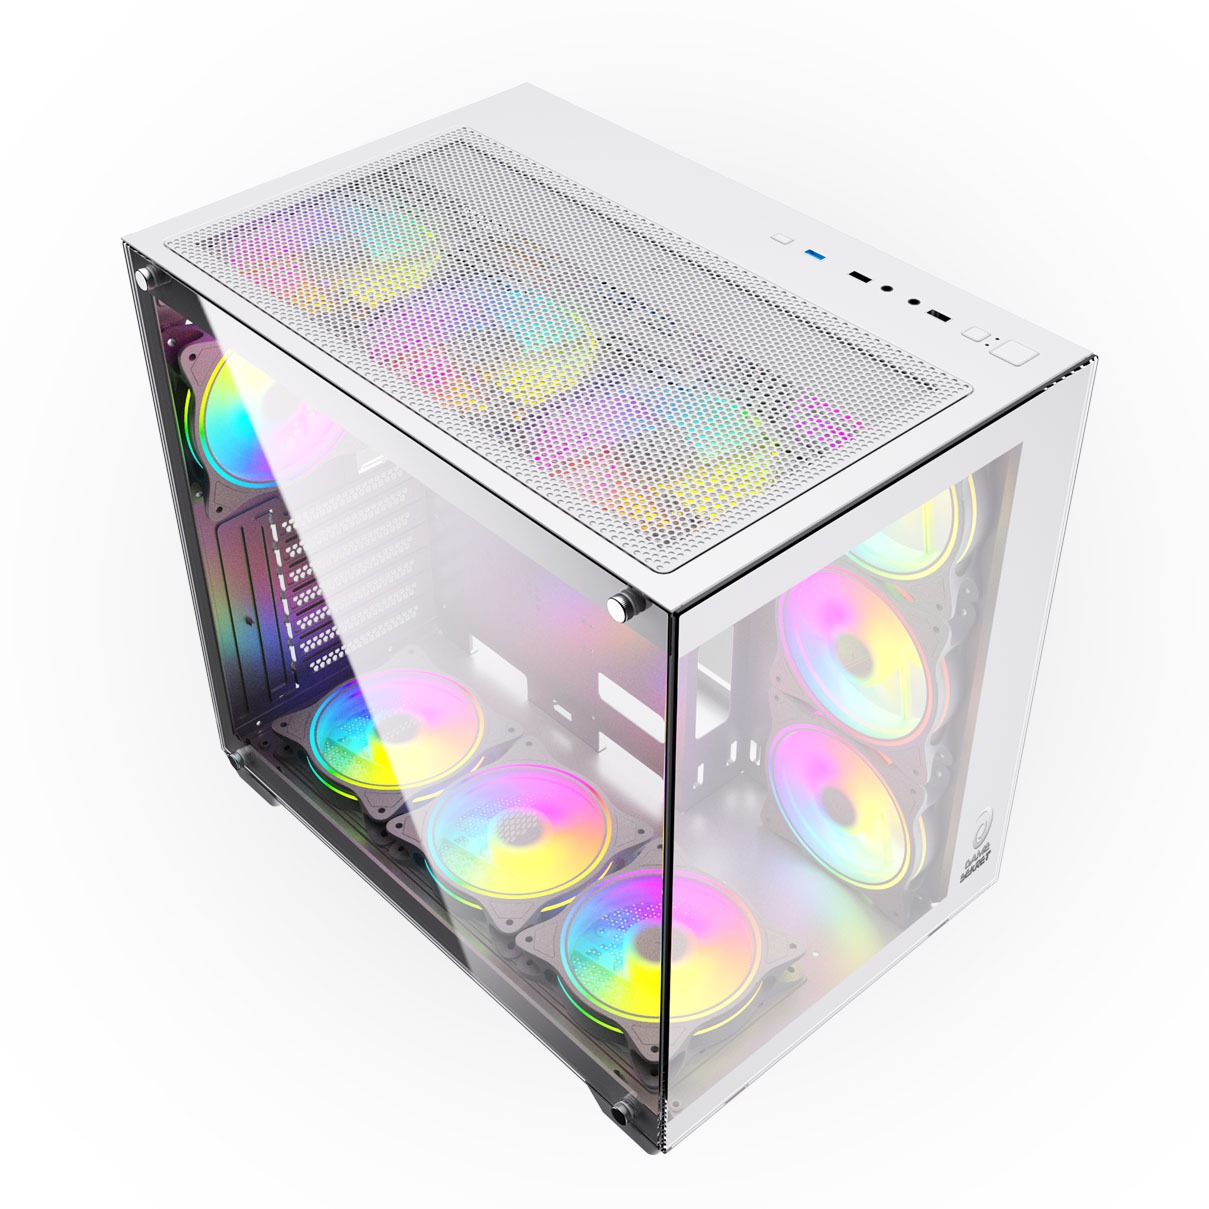 Chiller Gaming PC Case06